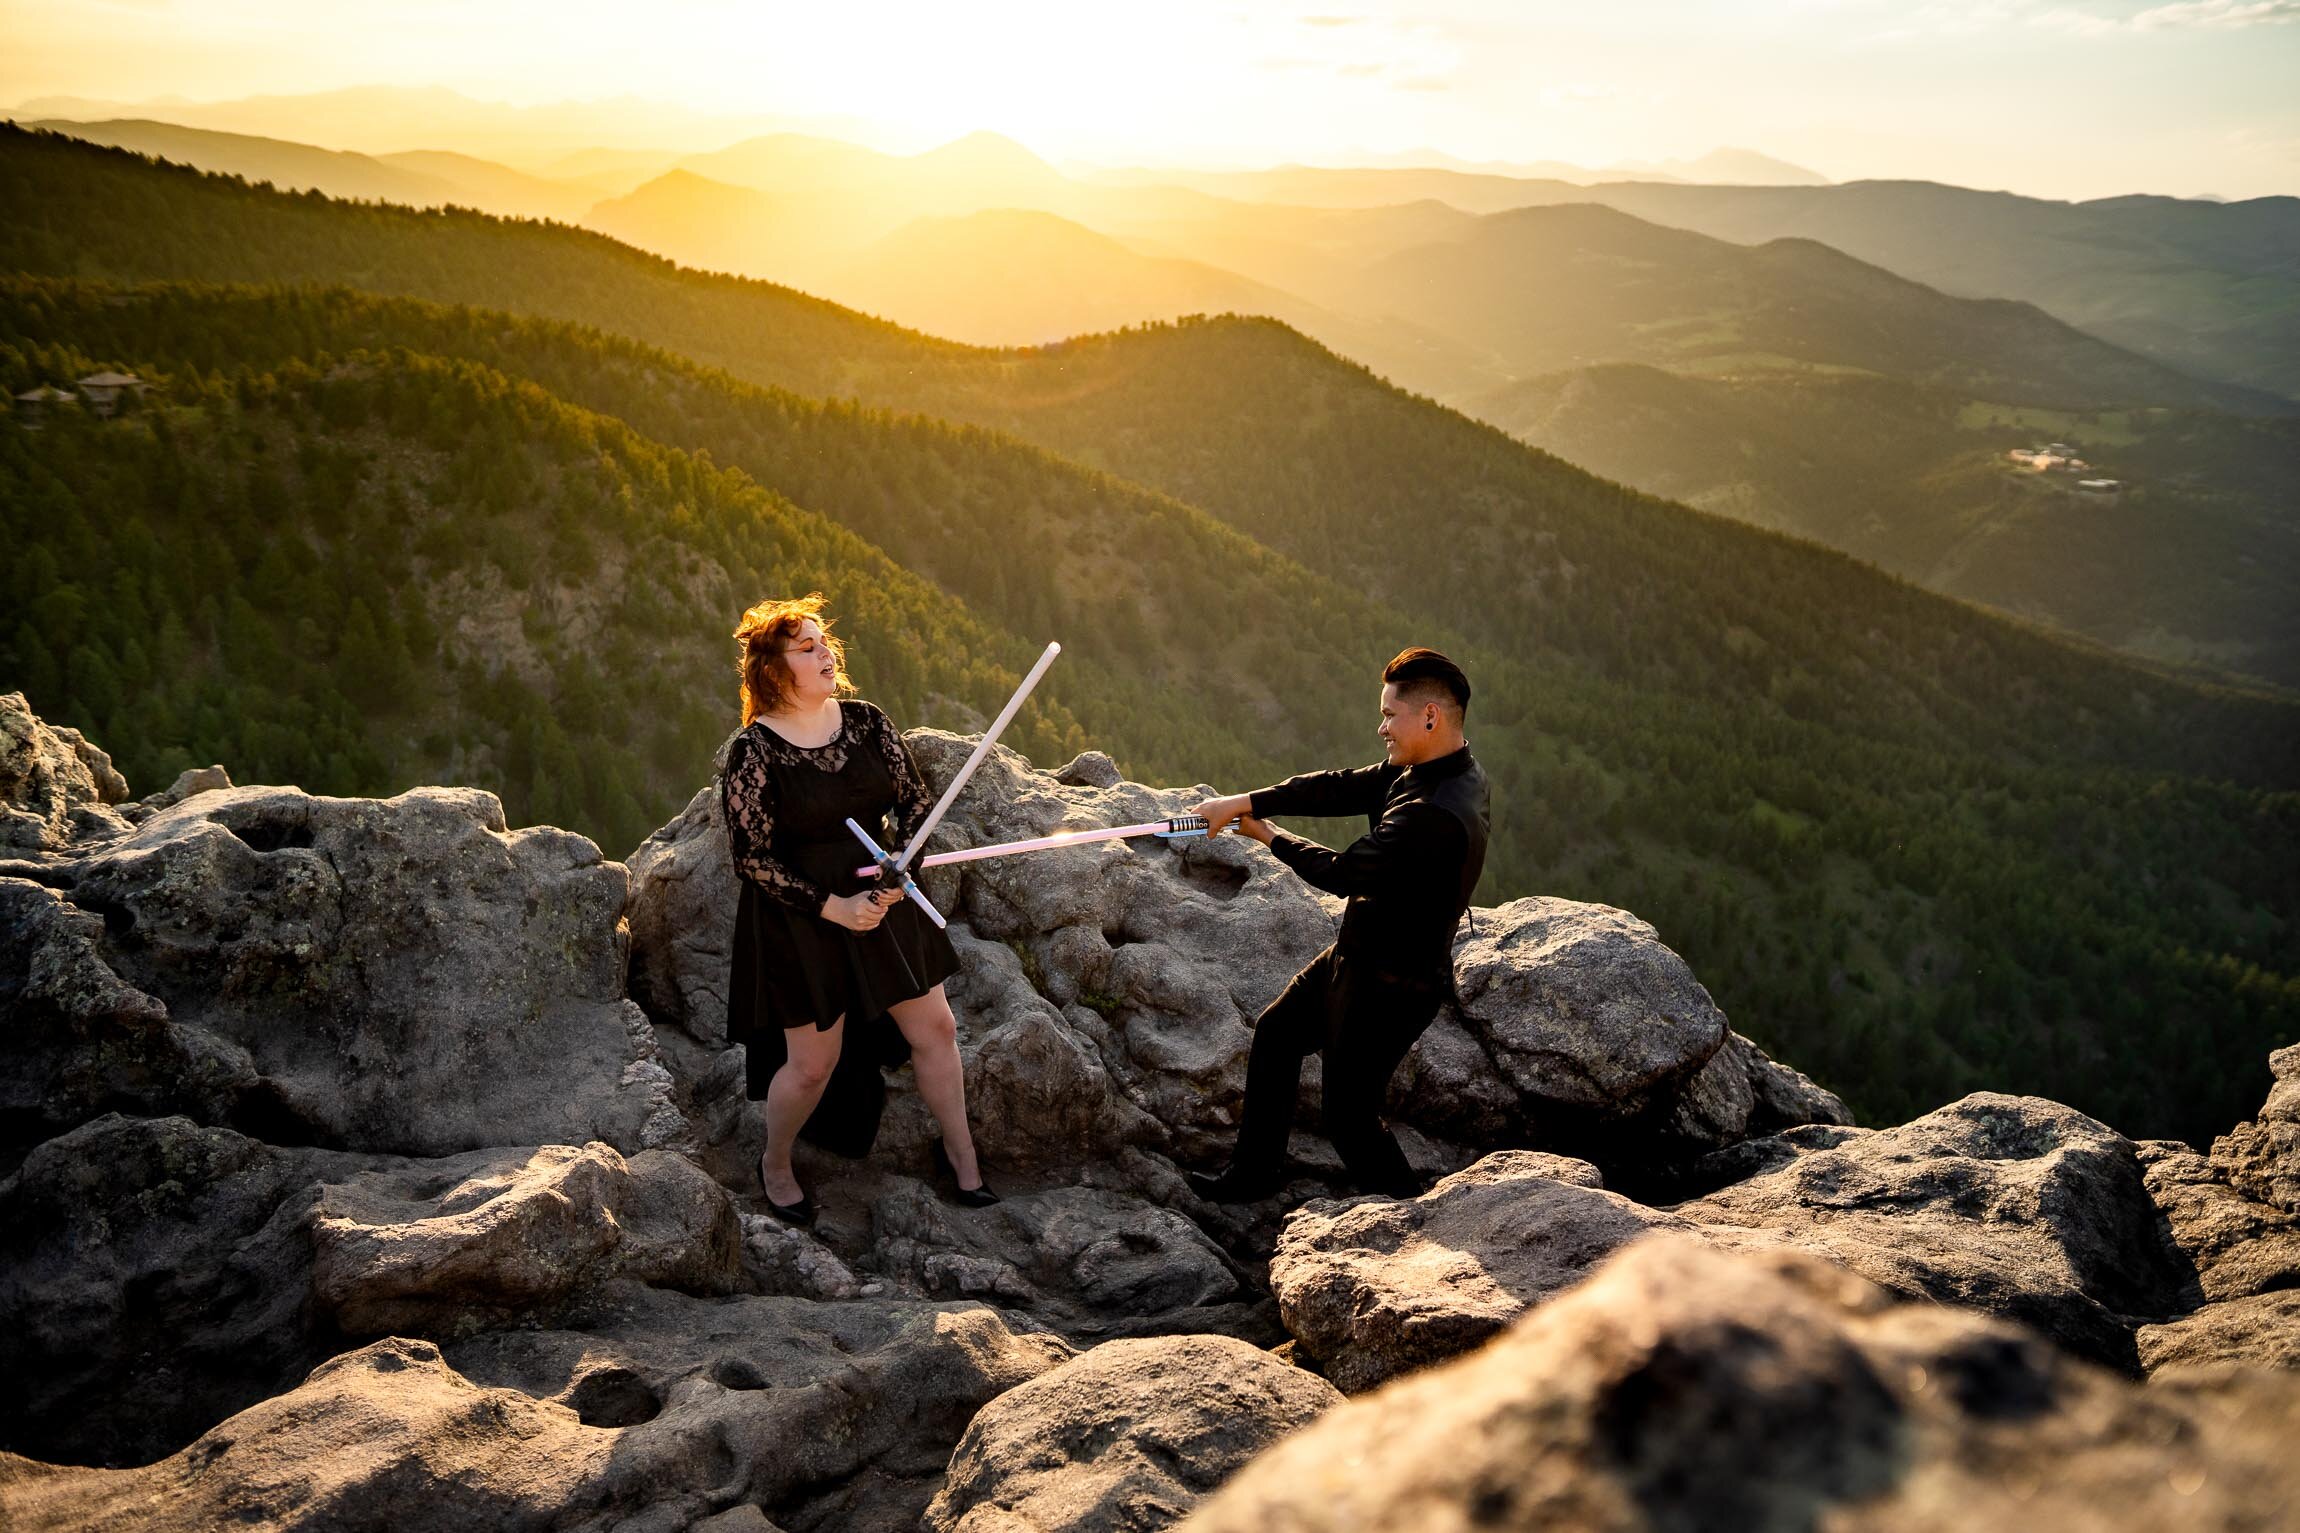 Engaged couple jumps into cosplay with their light sabers on a rocky ledge overlooking the mountains during golden hour, Engagement Session, Engagement Photos, Engagement Photos Inspiration, Engagement Photography, Engagement Photographer, Summer Engagement Photos, Mountain Engagement Photos, Lost Gulch Overlook engagement session, Lost Gulch Overlook engagement photos, Lost Gulch Overlook engagement photography, Lost Gulch Overlook engagement photographer, Lost Gulch Overlook  engagement inspiration, Boulder engagement session, Boulder engagement photos, Boulder engagement photography, Boulder engagement photographer, Boulder engagement inspiration, Colorado engagement session, Colorado engagement photos, Colorado engagement photography, Colorado engagement photographer, Colorado engagement inspiration